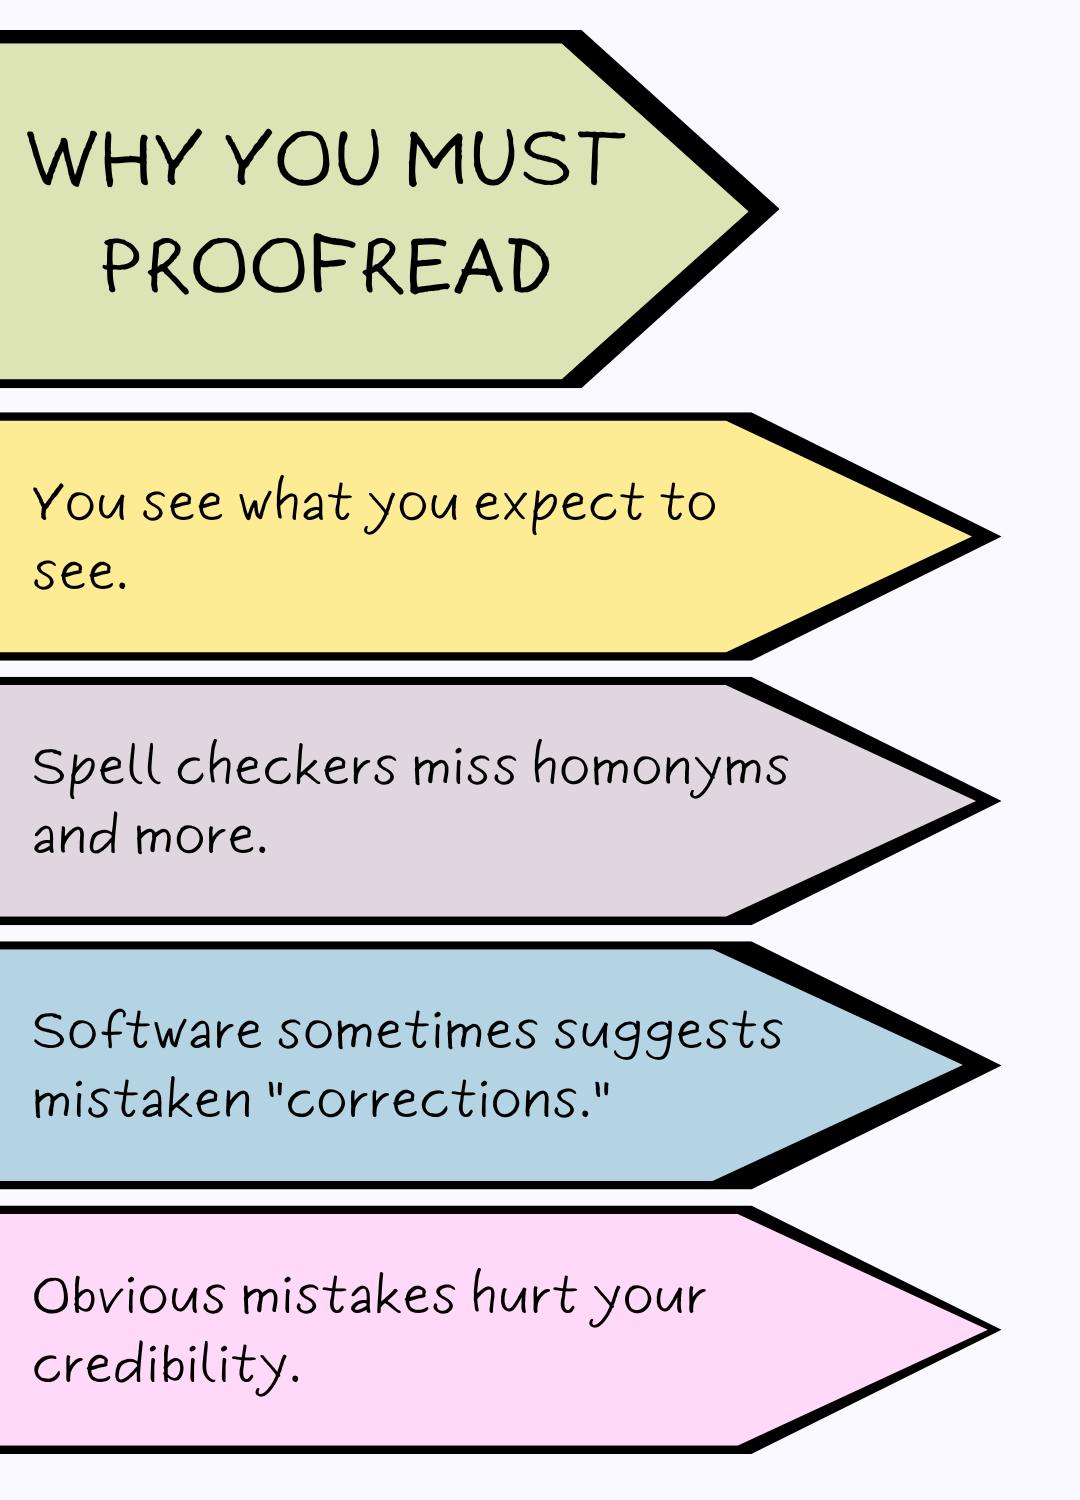 Why you must proofread infographic